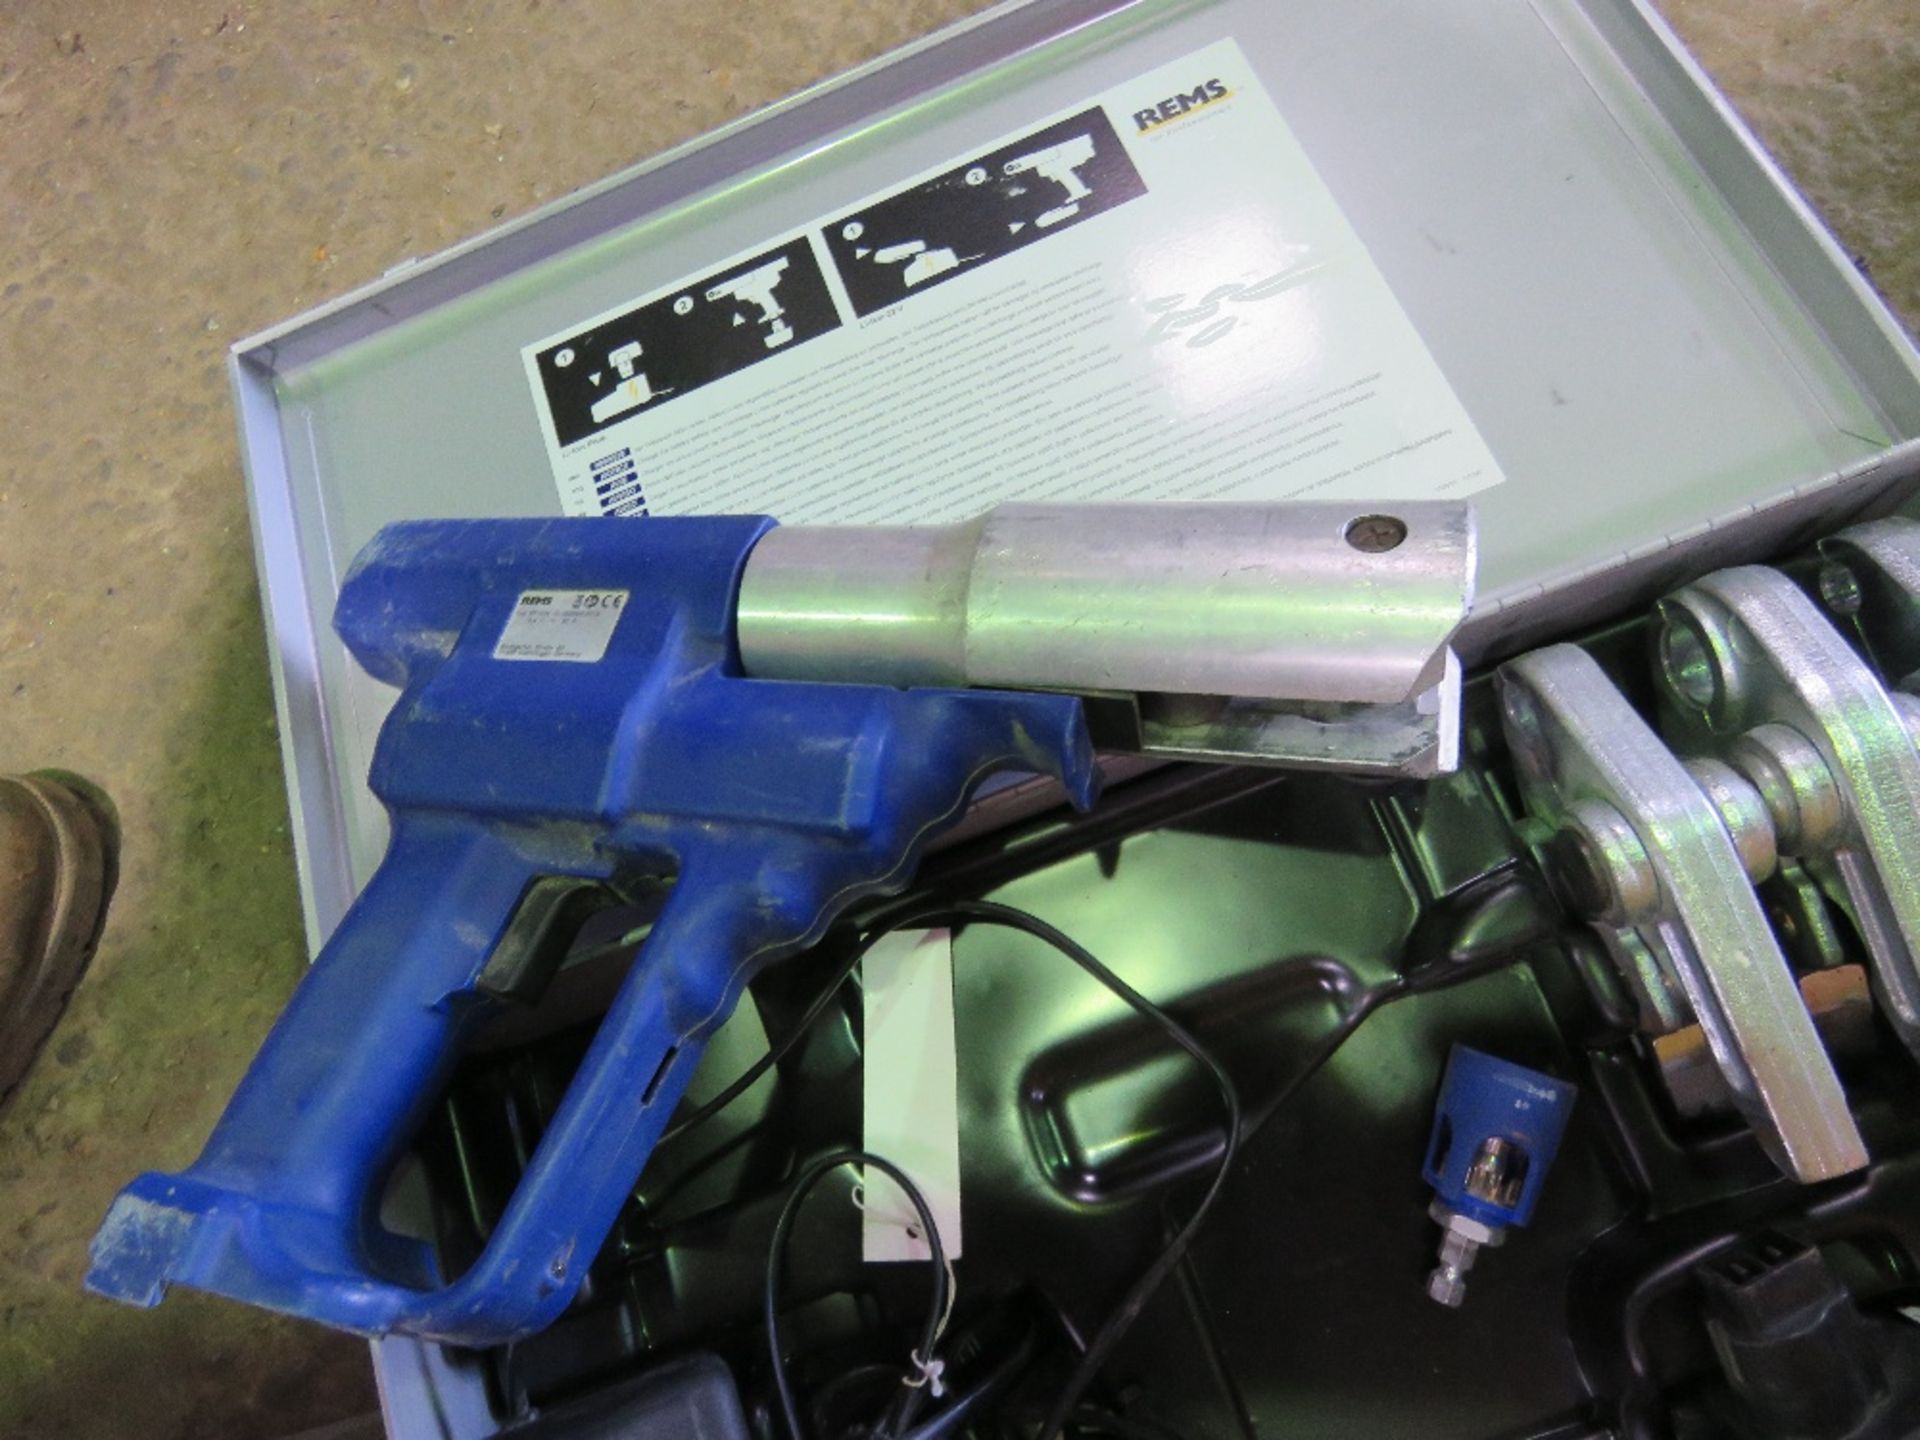 REMS AKKU-PRESS ACC BATTERY POWERED CRIMPING SET IN A CASE. SOURCED FROM LARGE CONSTRUCTION COMPANY - Image 5 of 6